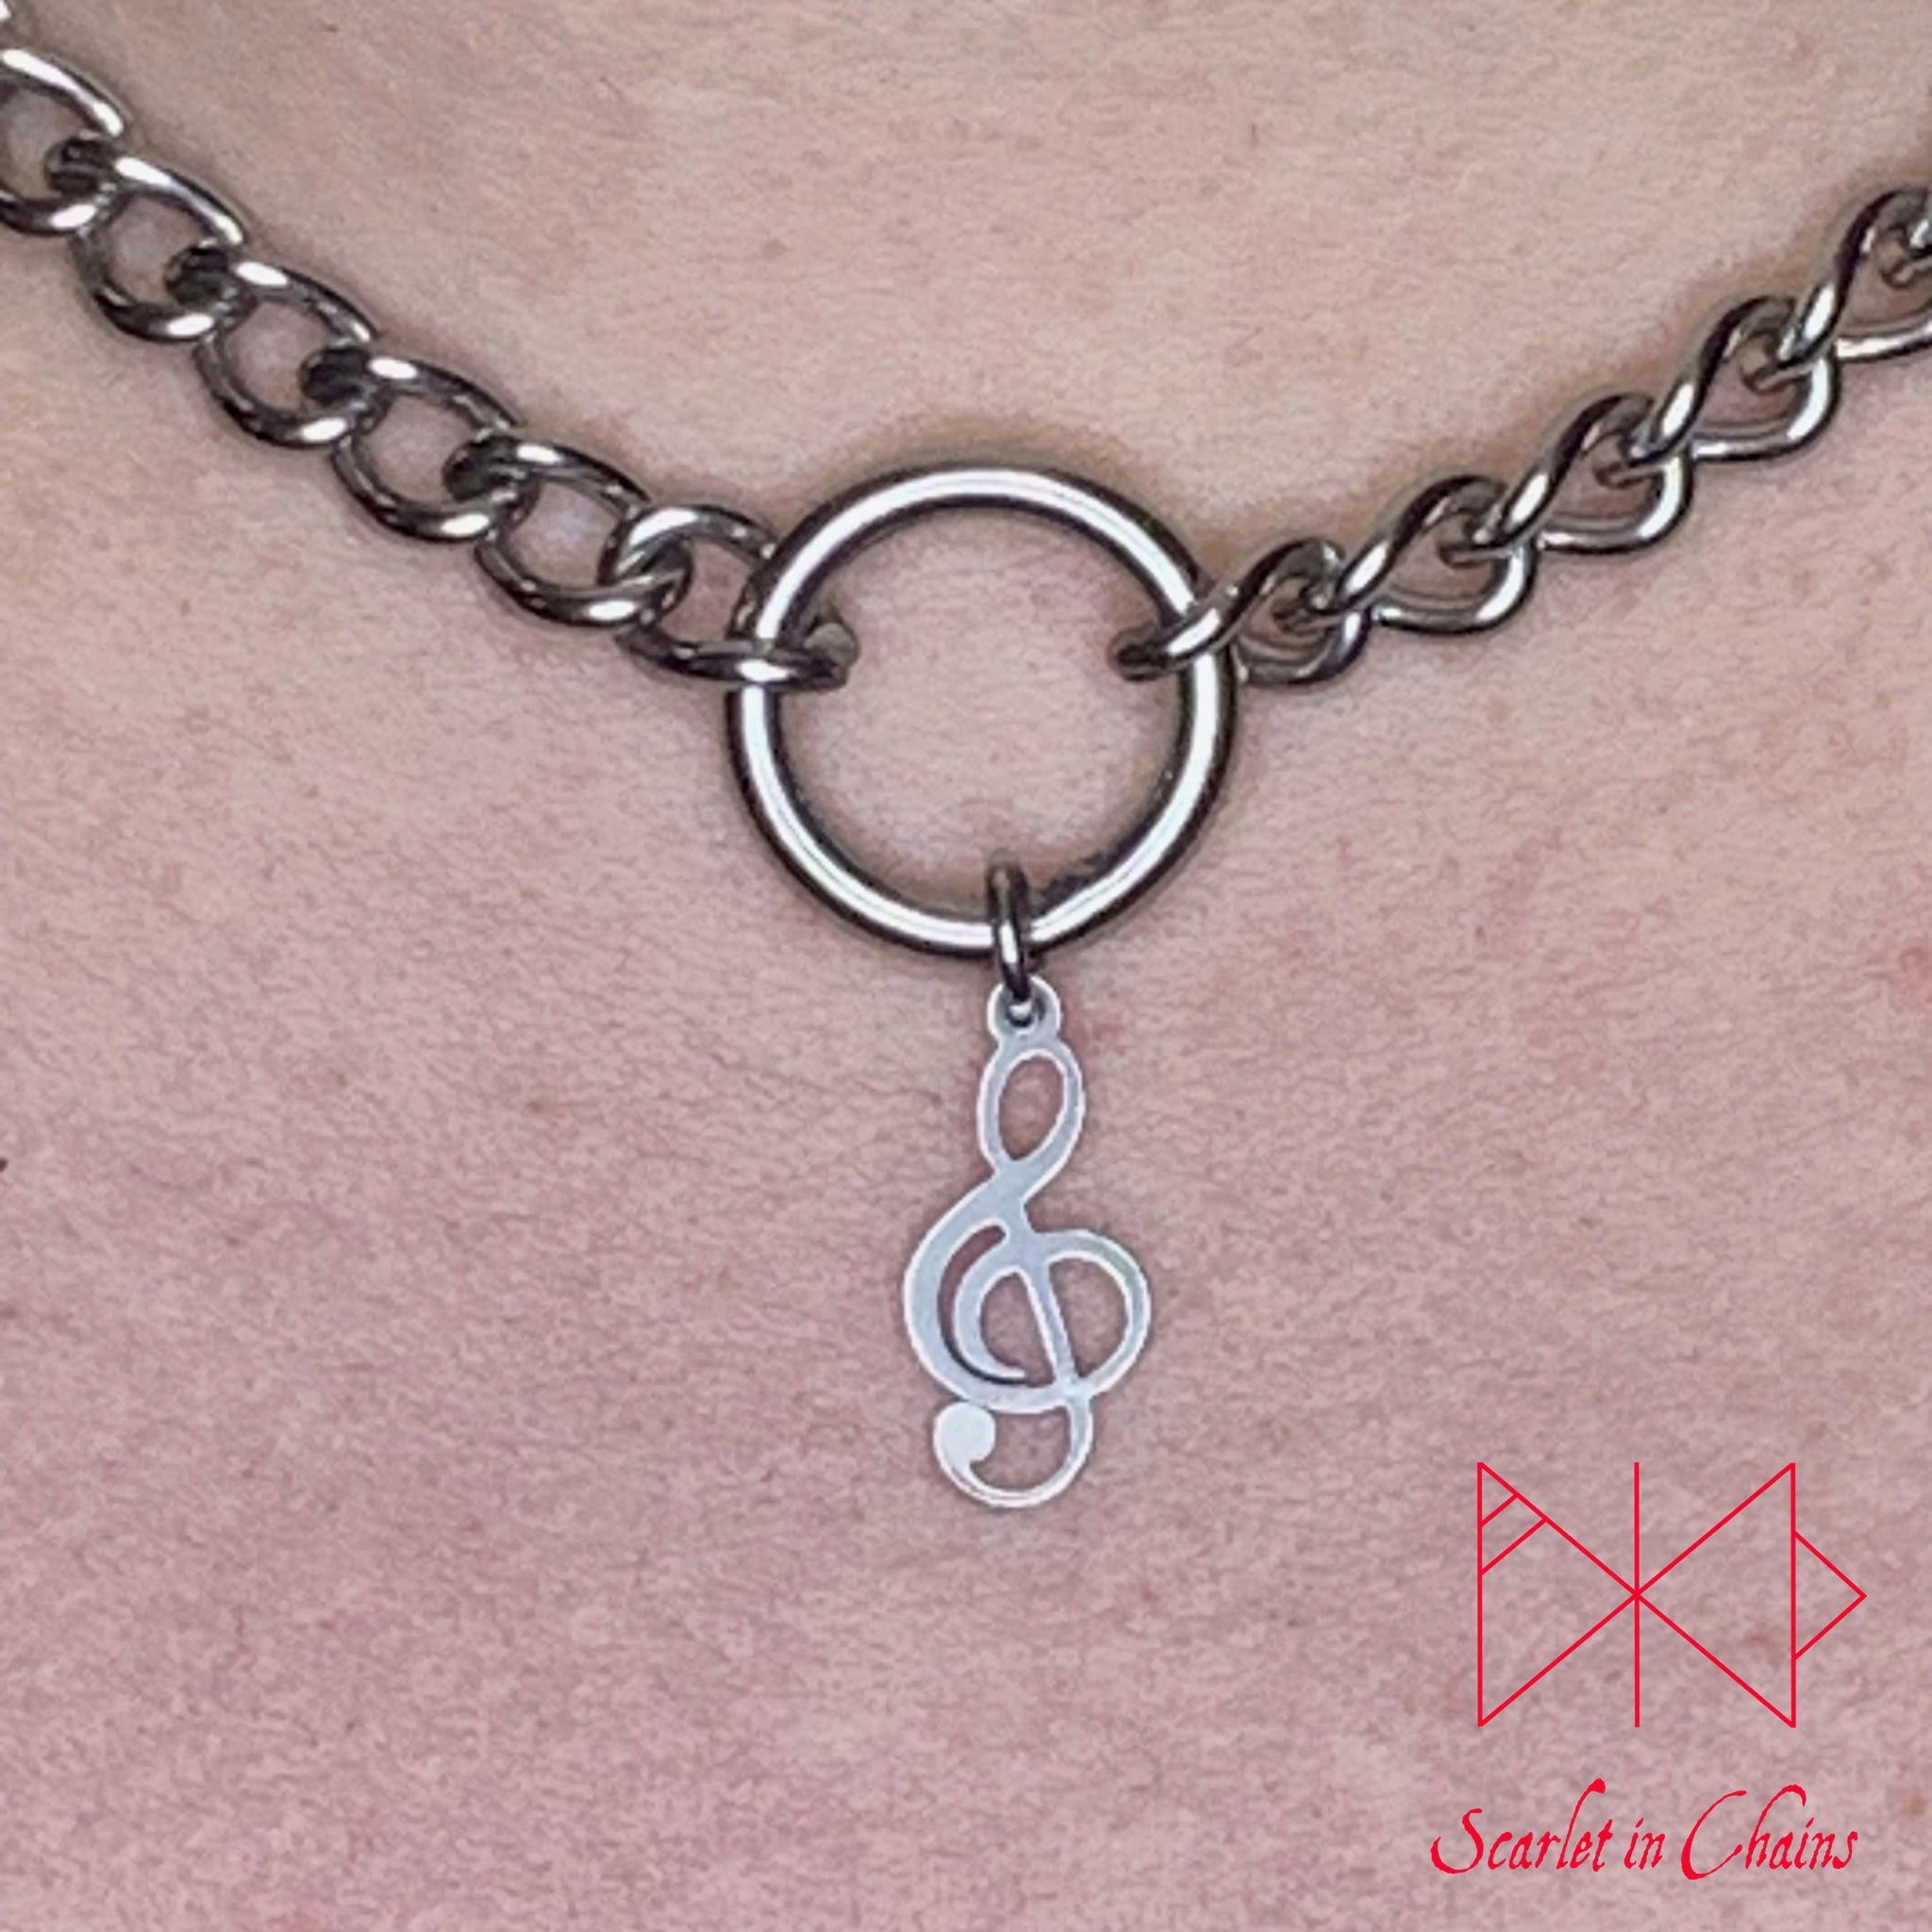 Stainless Steel Treble Clef charm necklace - Music Necklace - Bdsm Day collar - O ring choker - O ring collar - Goth Choker - Fetish - Choker - Day Collar shown close